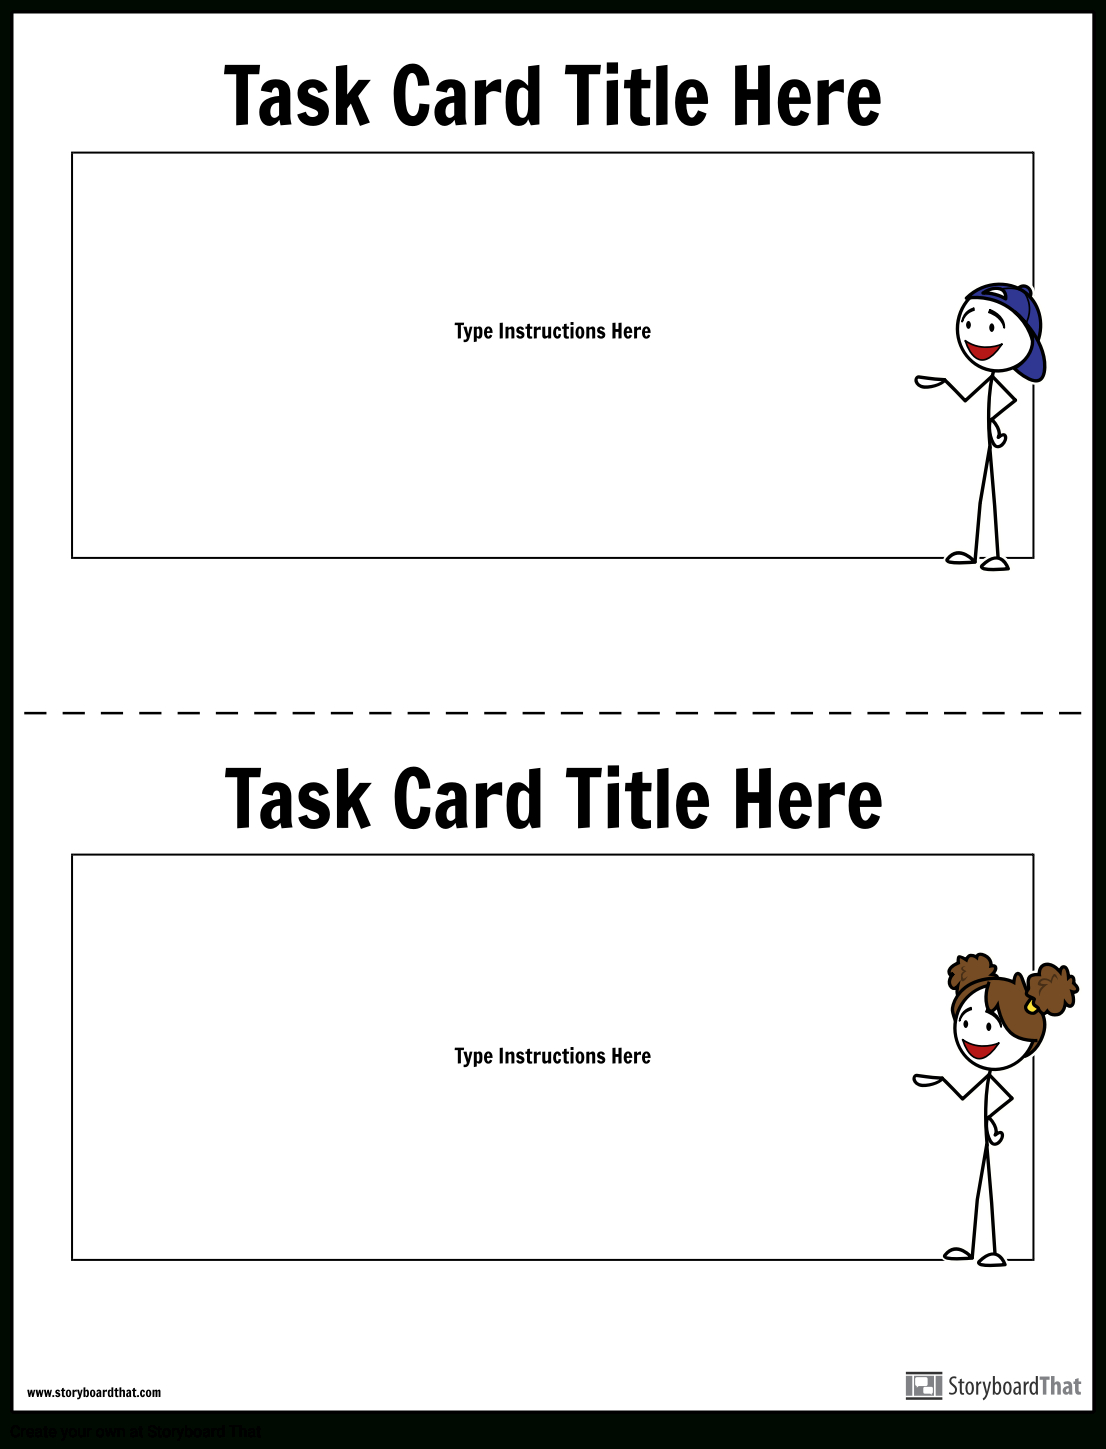 Task Card Template | Task Card Maker Within Task Card Template